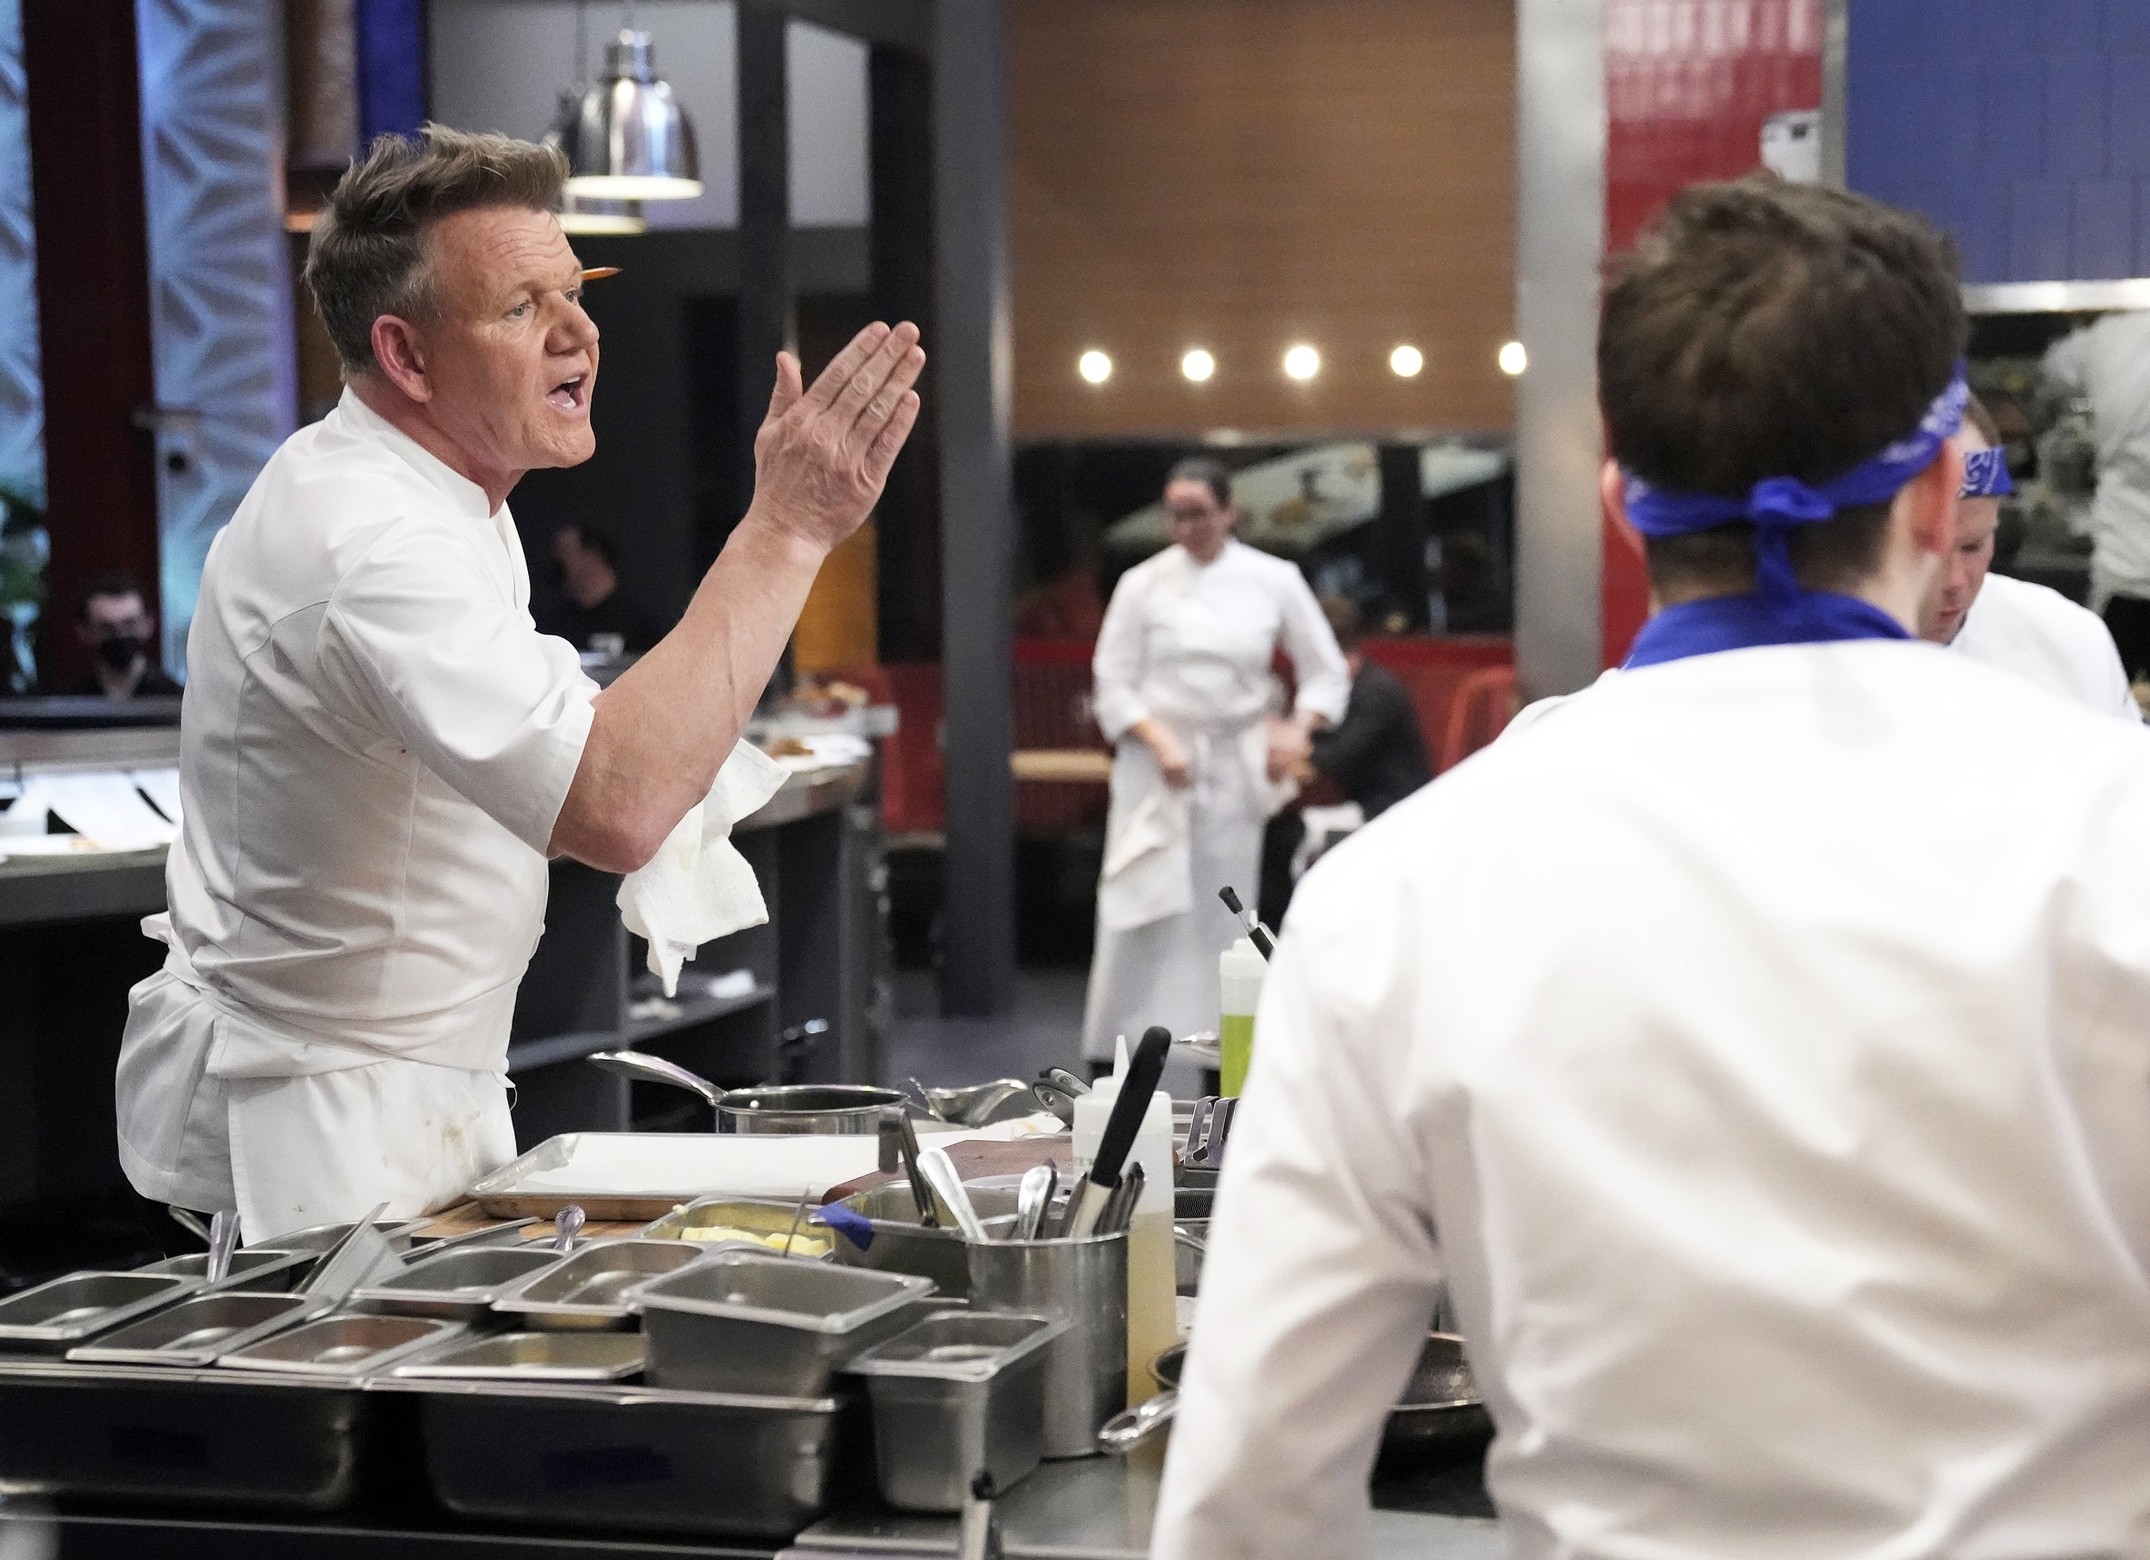 Gordon Ramsay gesturing and speaking to a chef in a kitchen during a cooking competition